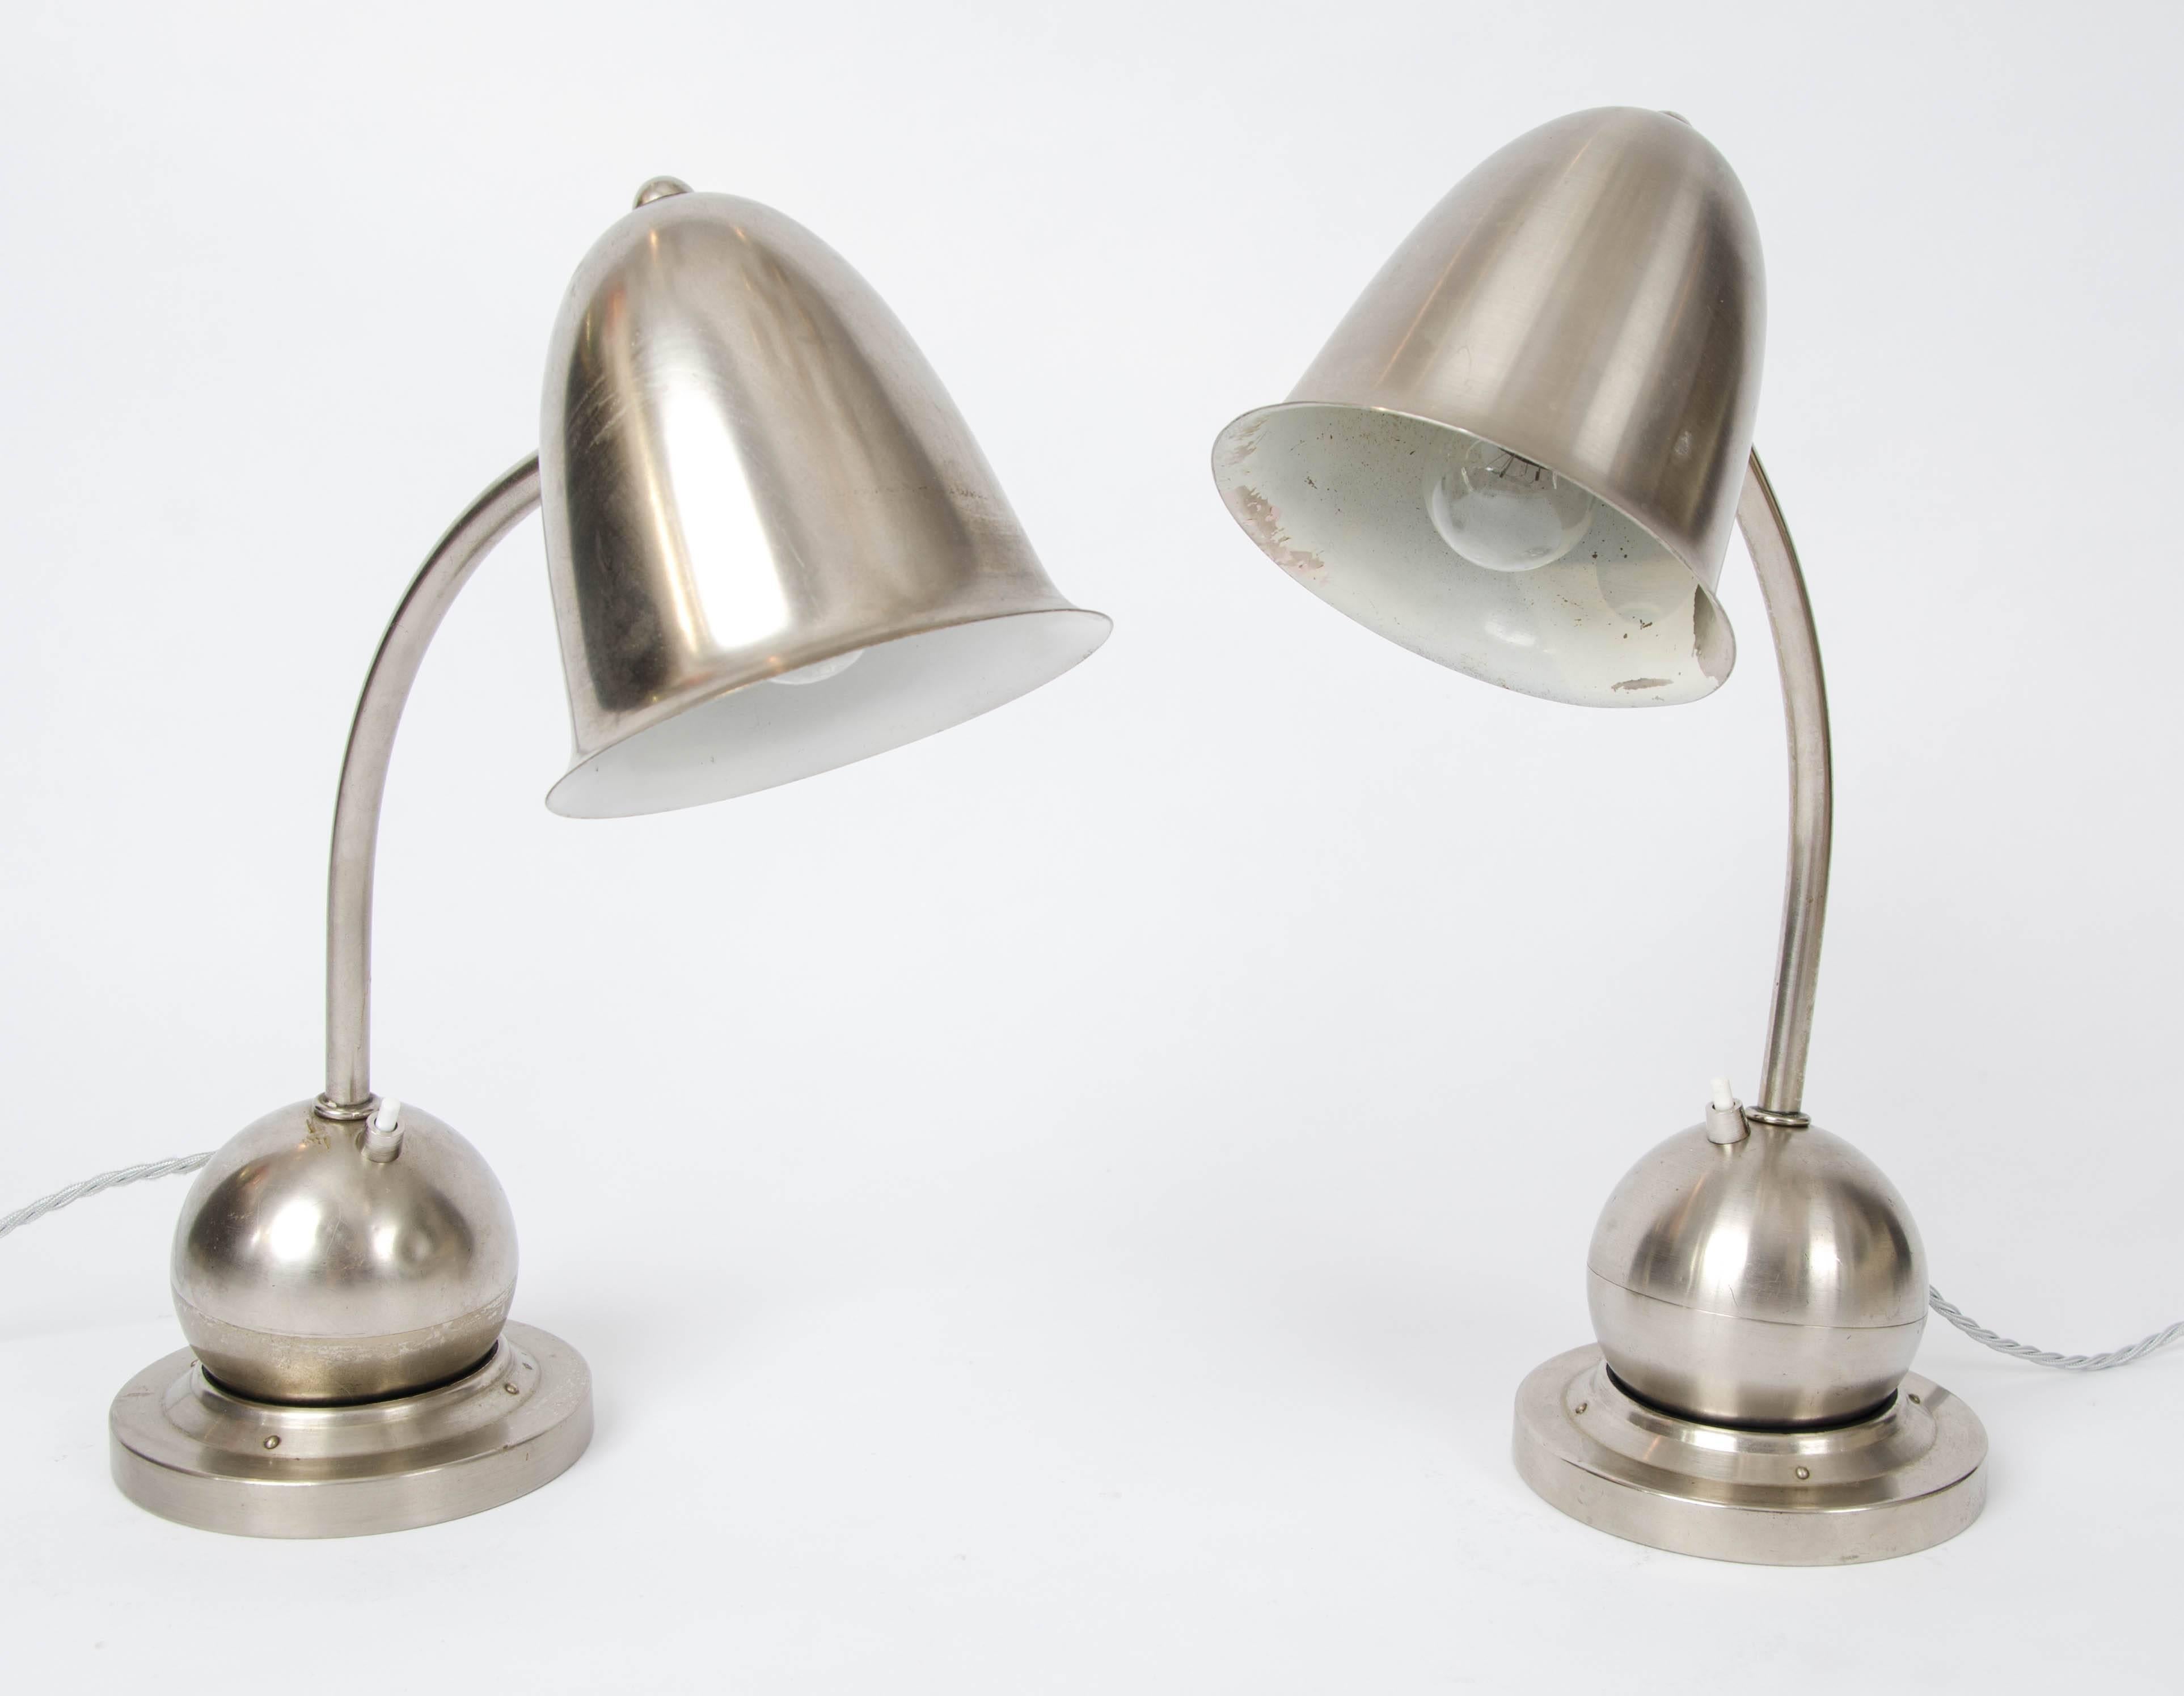 Art Deco table or desk lamps by Daalderop, Giso
Holland, 1930s. Nickel-plated lamps are fully adjustable in position; the ball is weighted and sits on a ring.